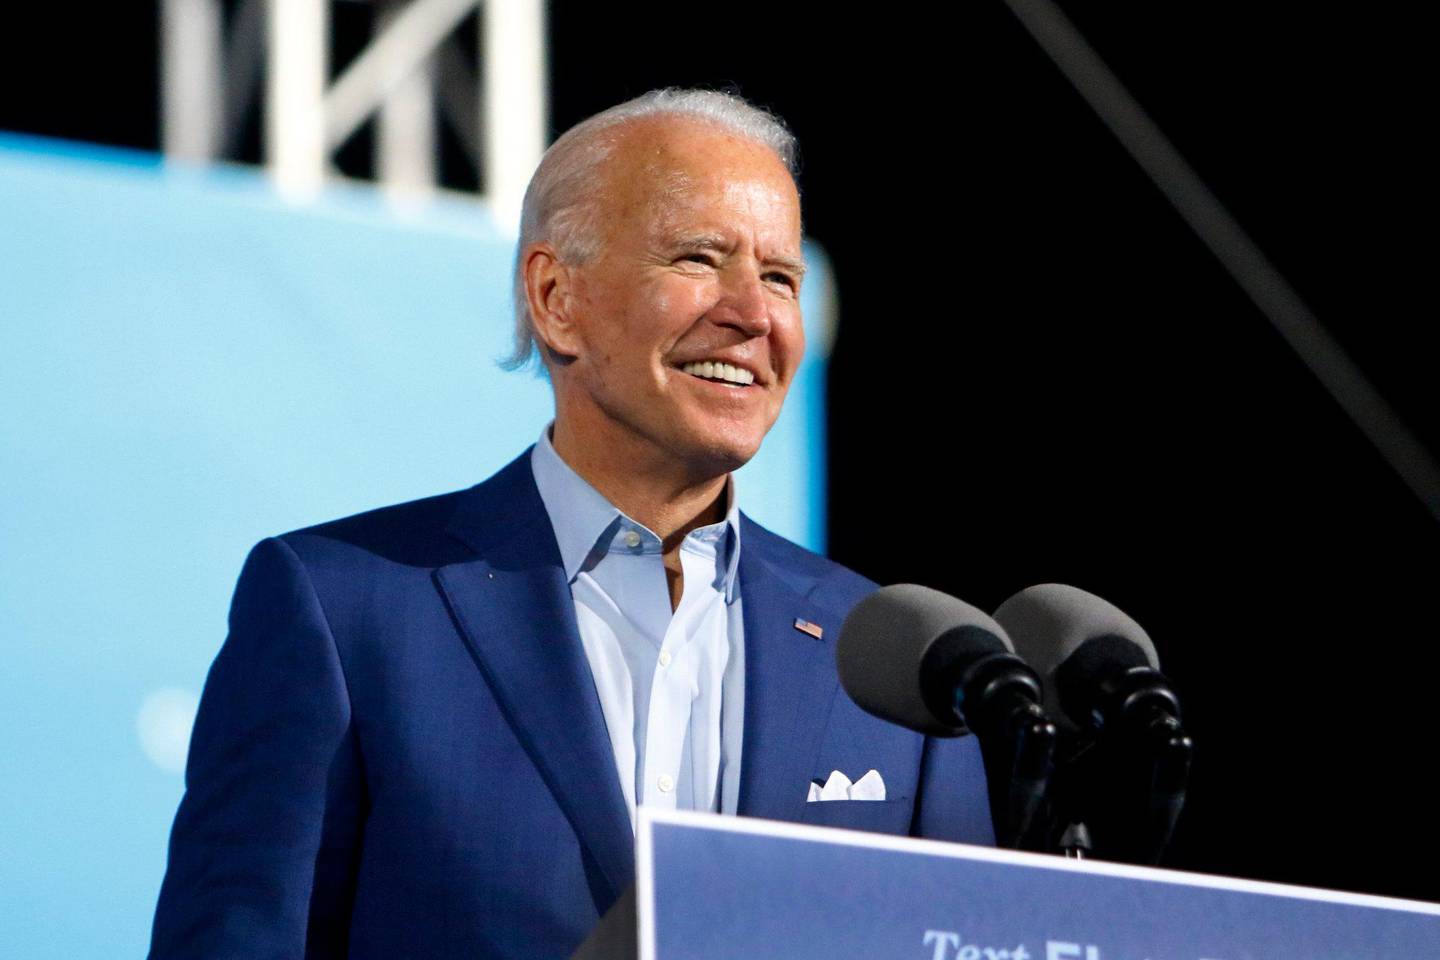 Democratic presidential candidate and former Vice President Joe Biden speaks to a crowd of supporters during a drive-in rally at the Florida State Fairgrounds, Thursday, Oct. 29, 2020 in Tampa, Fla. (Luis Santana/Tampa Bay Times via AP)